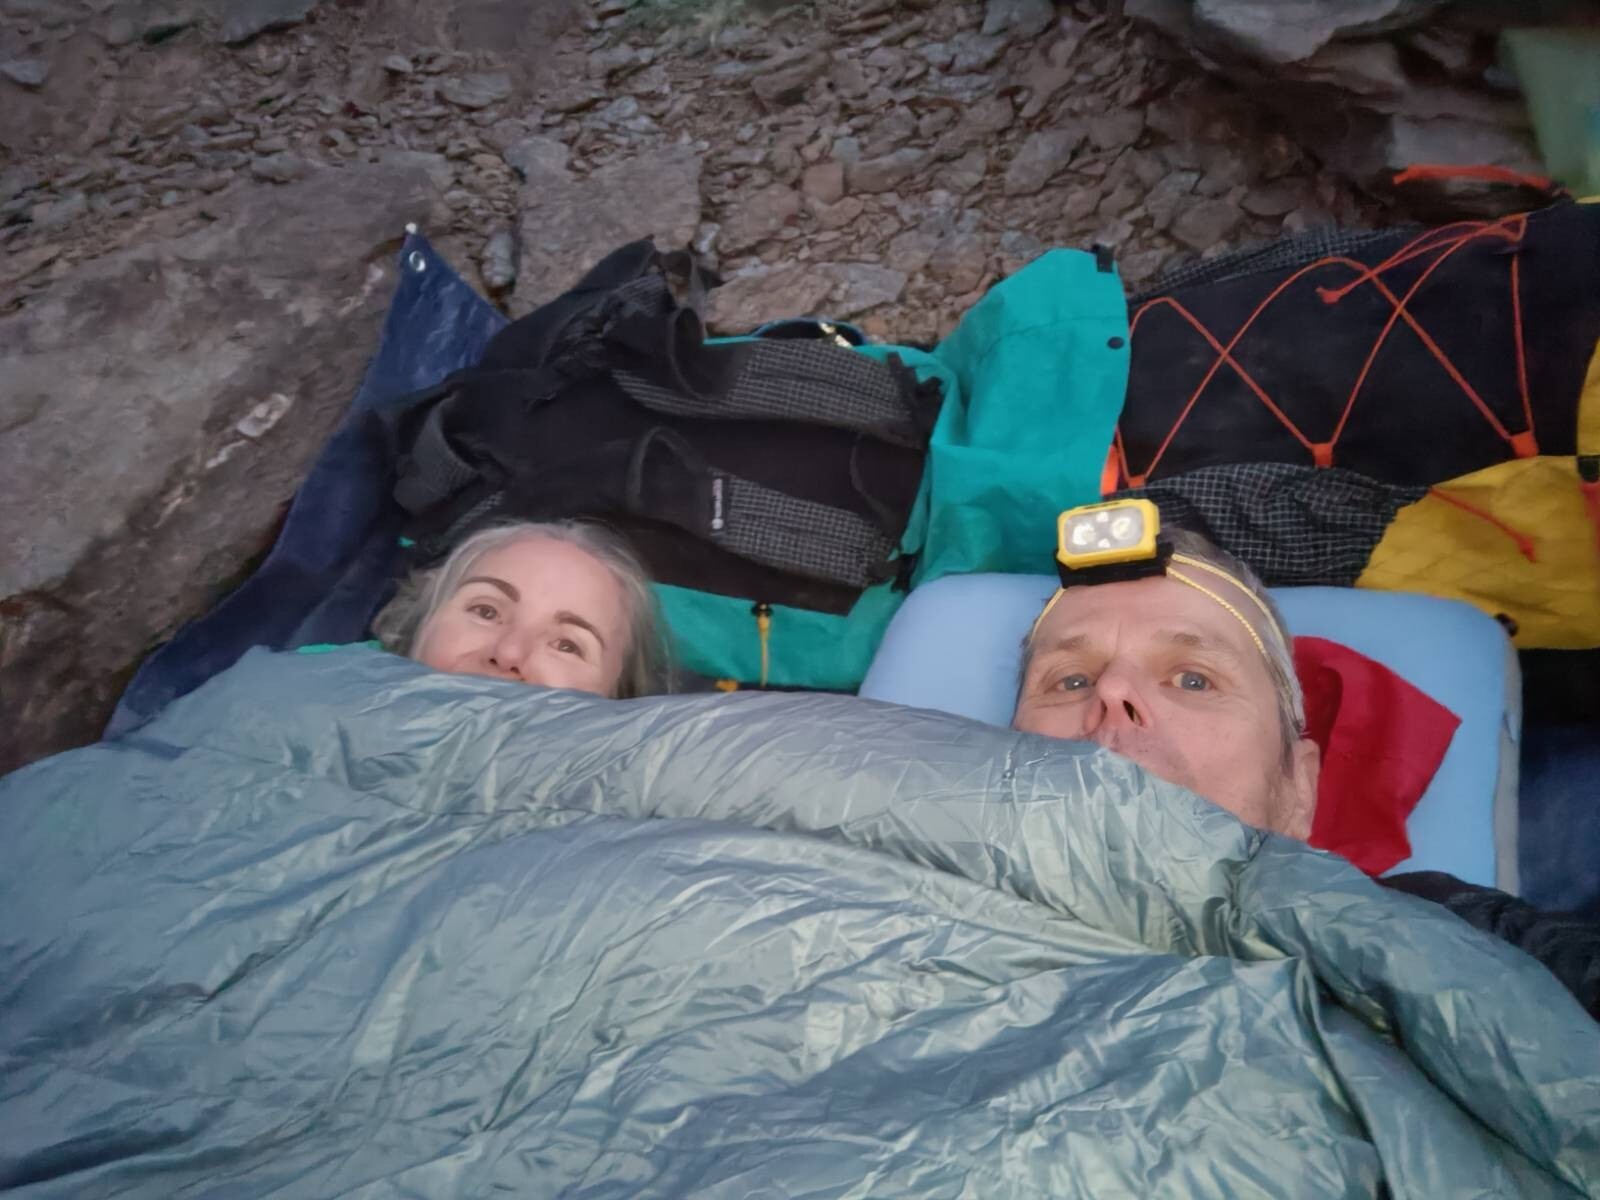 Two hikers wrapped in a sleeping quilt at a mountain bivouac site